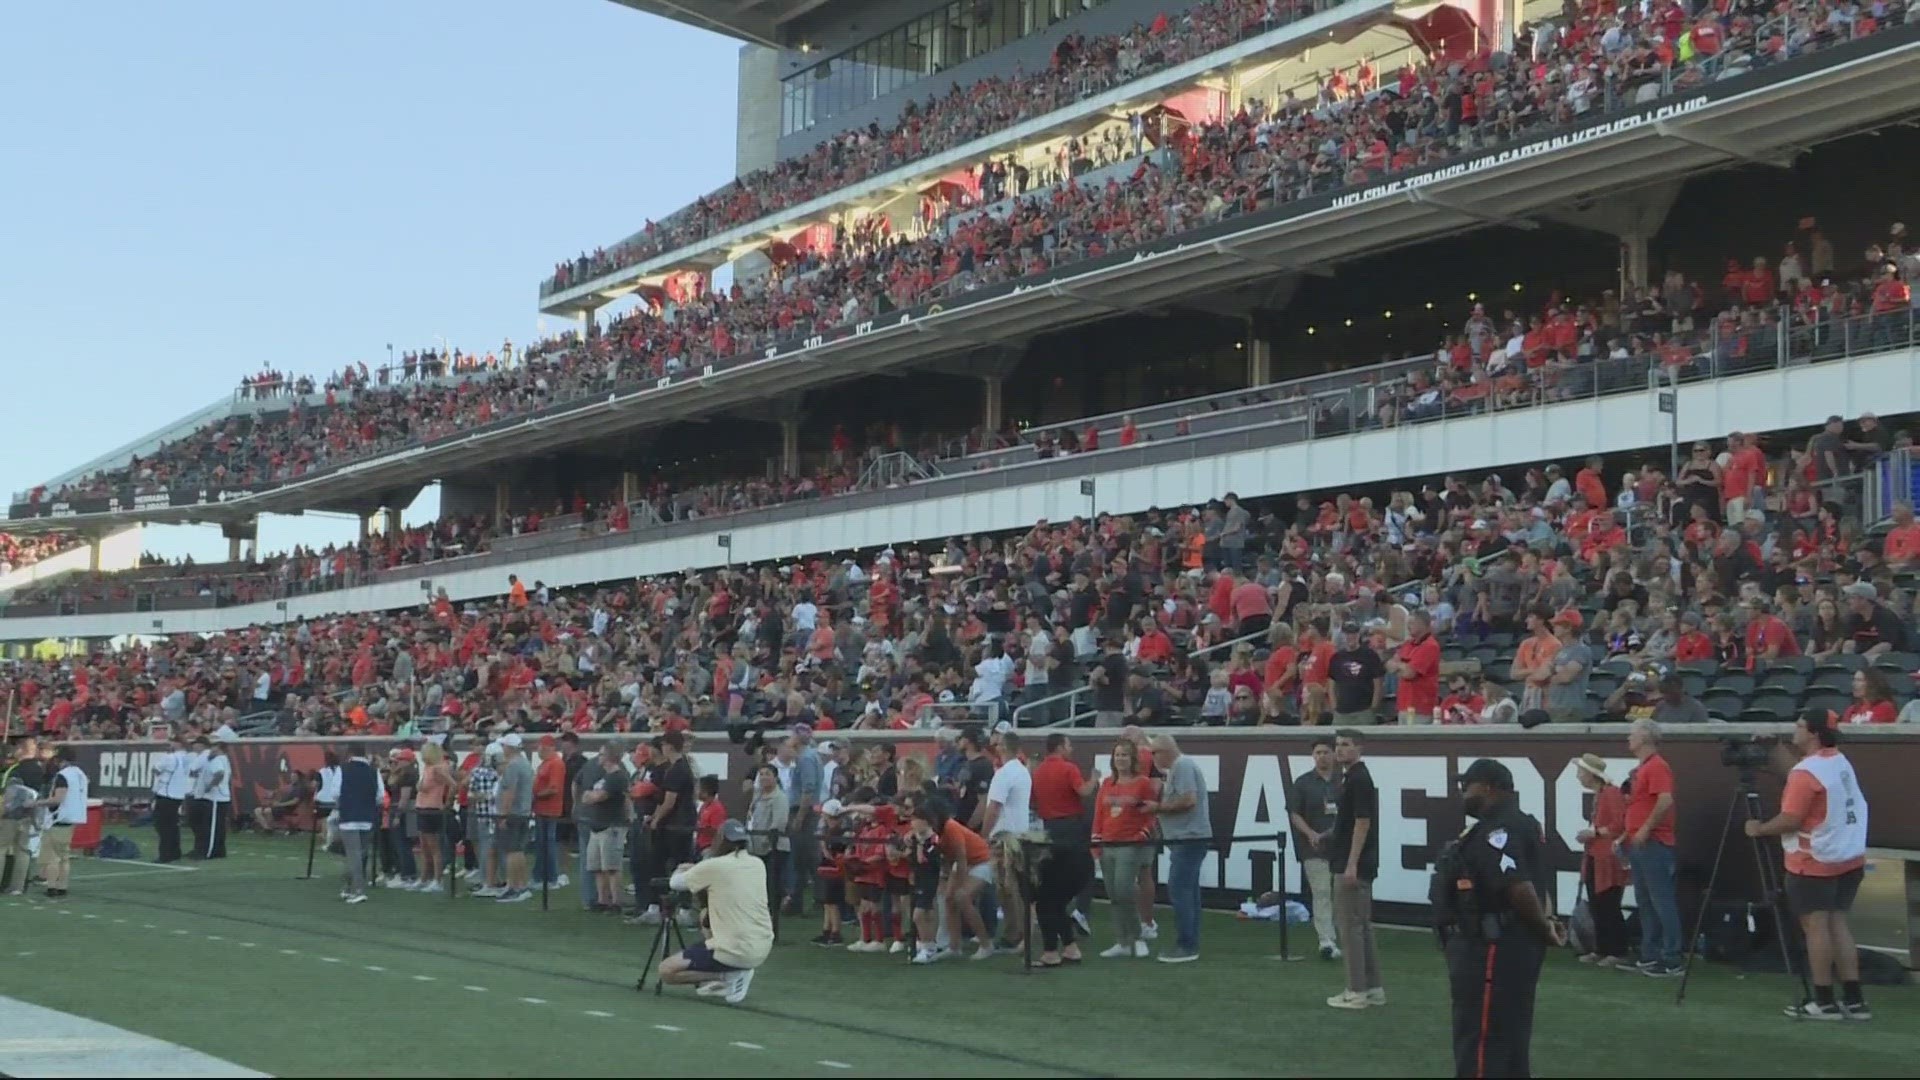 Oregon State just completed a $162 million remodel of Reser Stadium, increasing capacity to more than 43,000. Saturday's game was sold out.